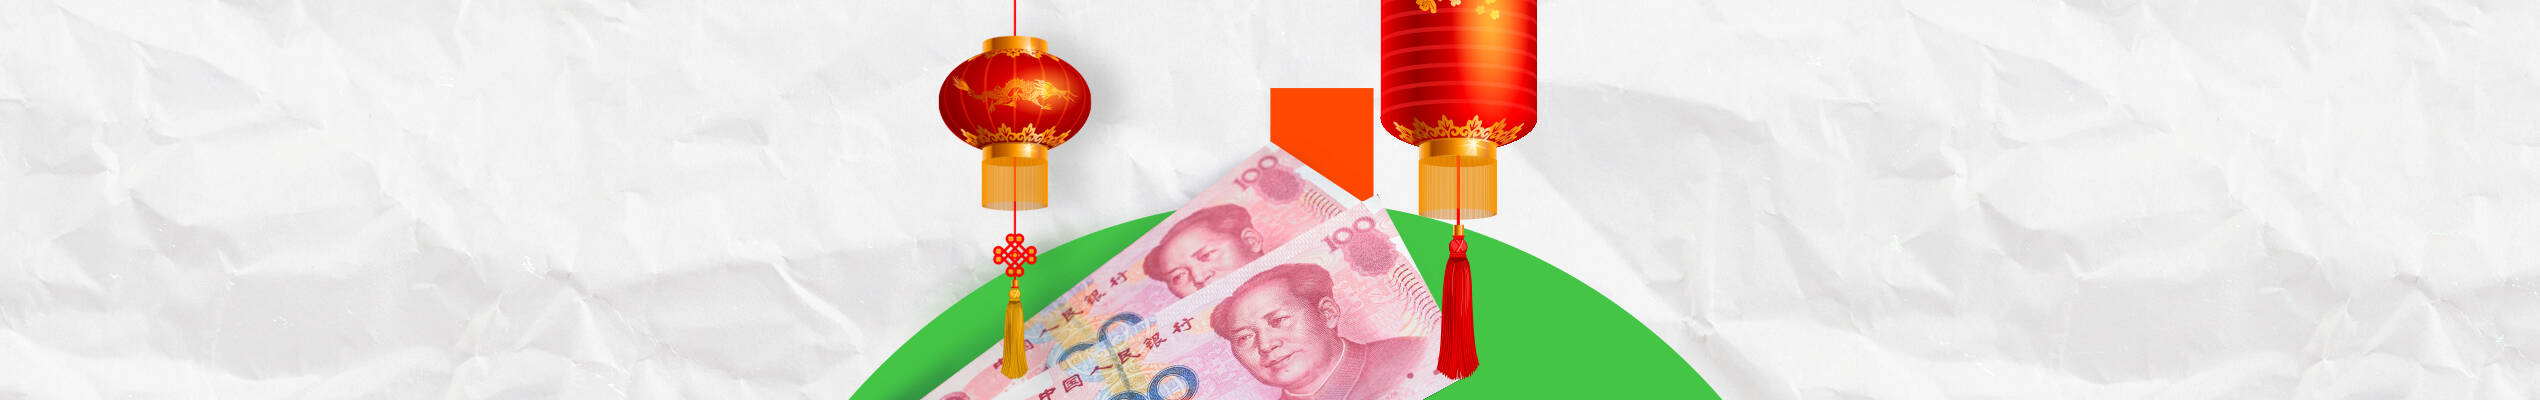 Digital Yuan: Chinese Currency of the Future